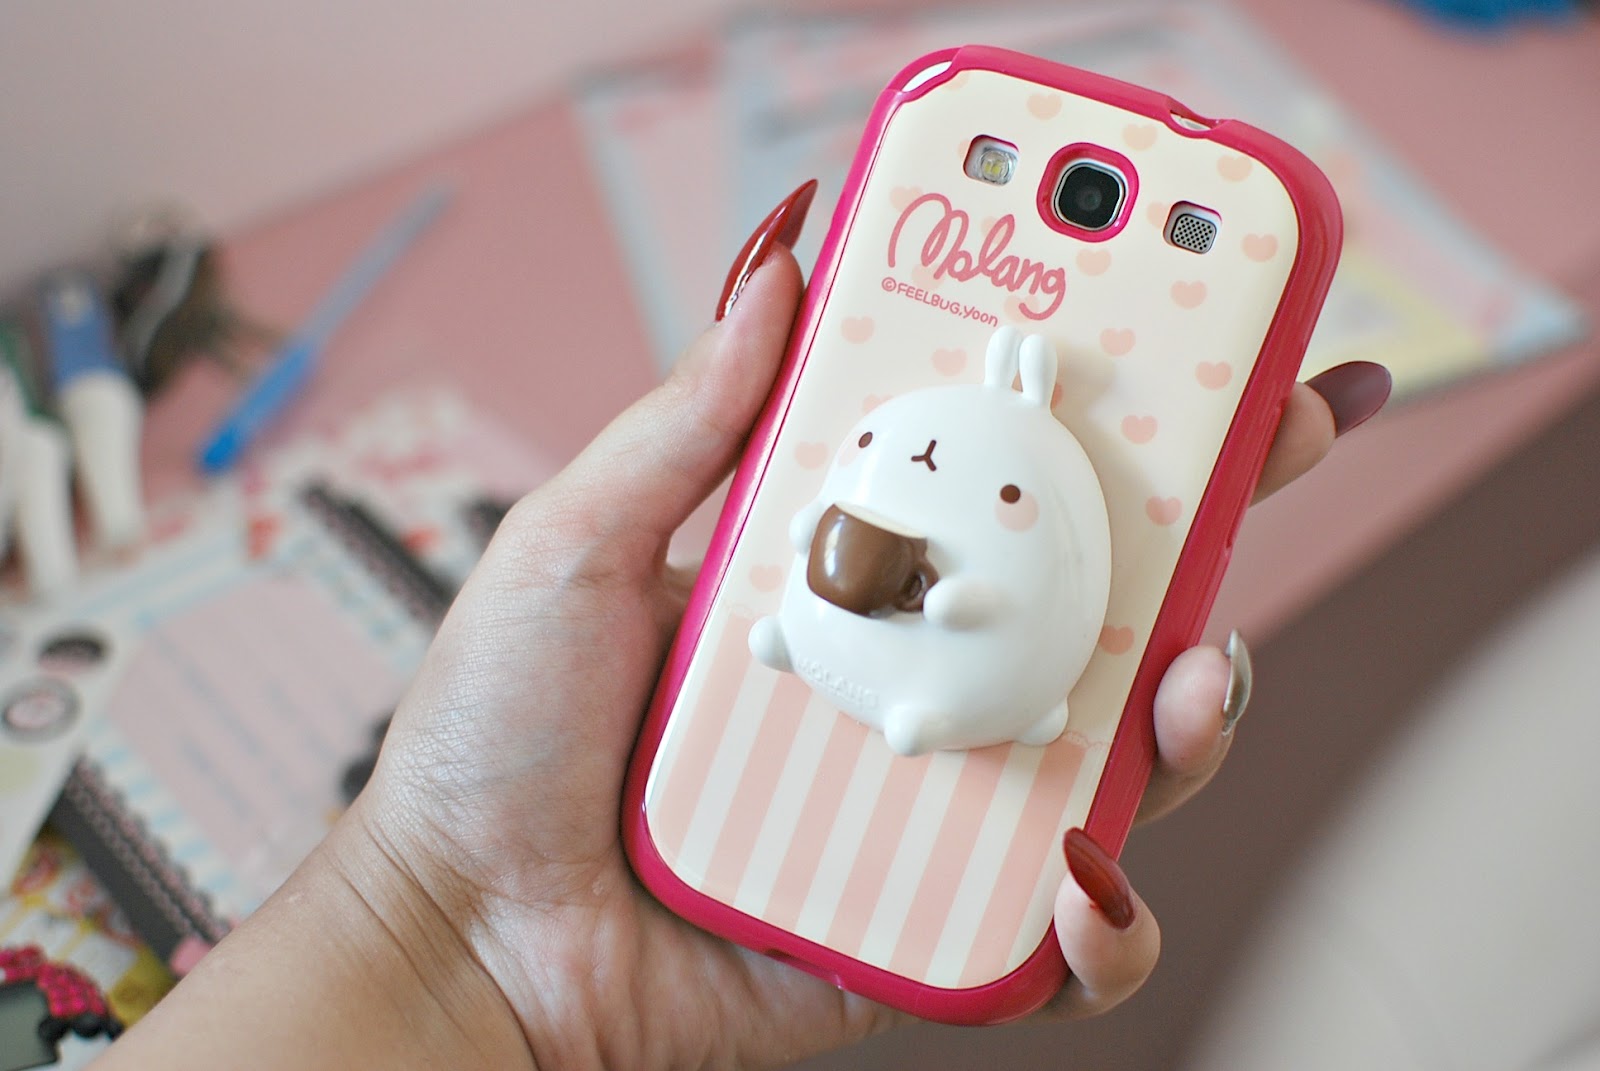 Molang in the Phone Sticker - Sticker Mania